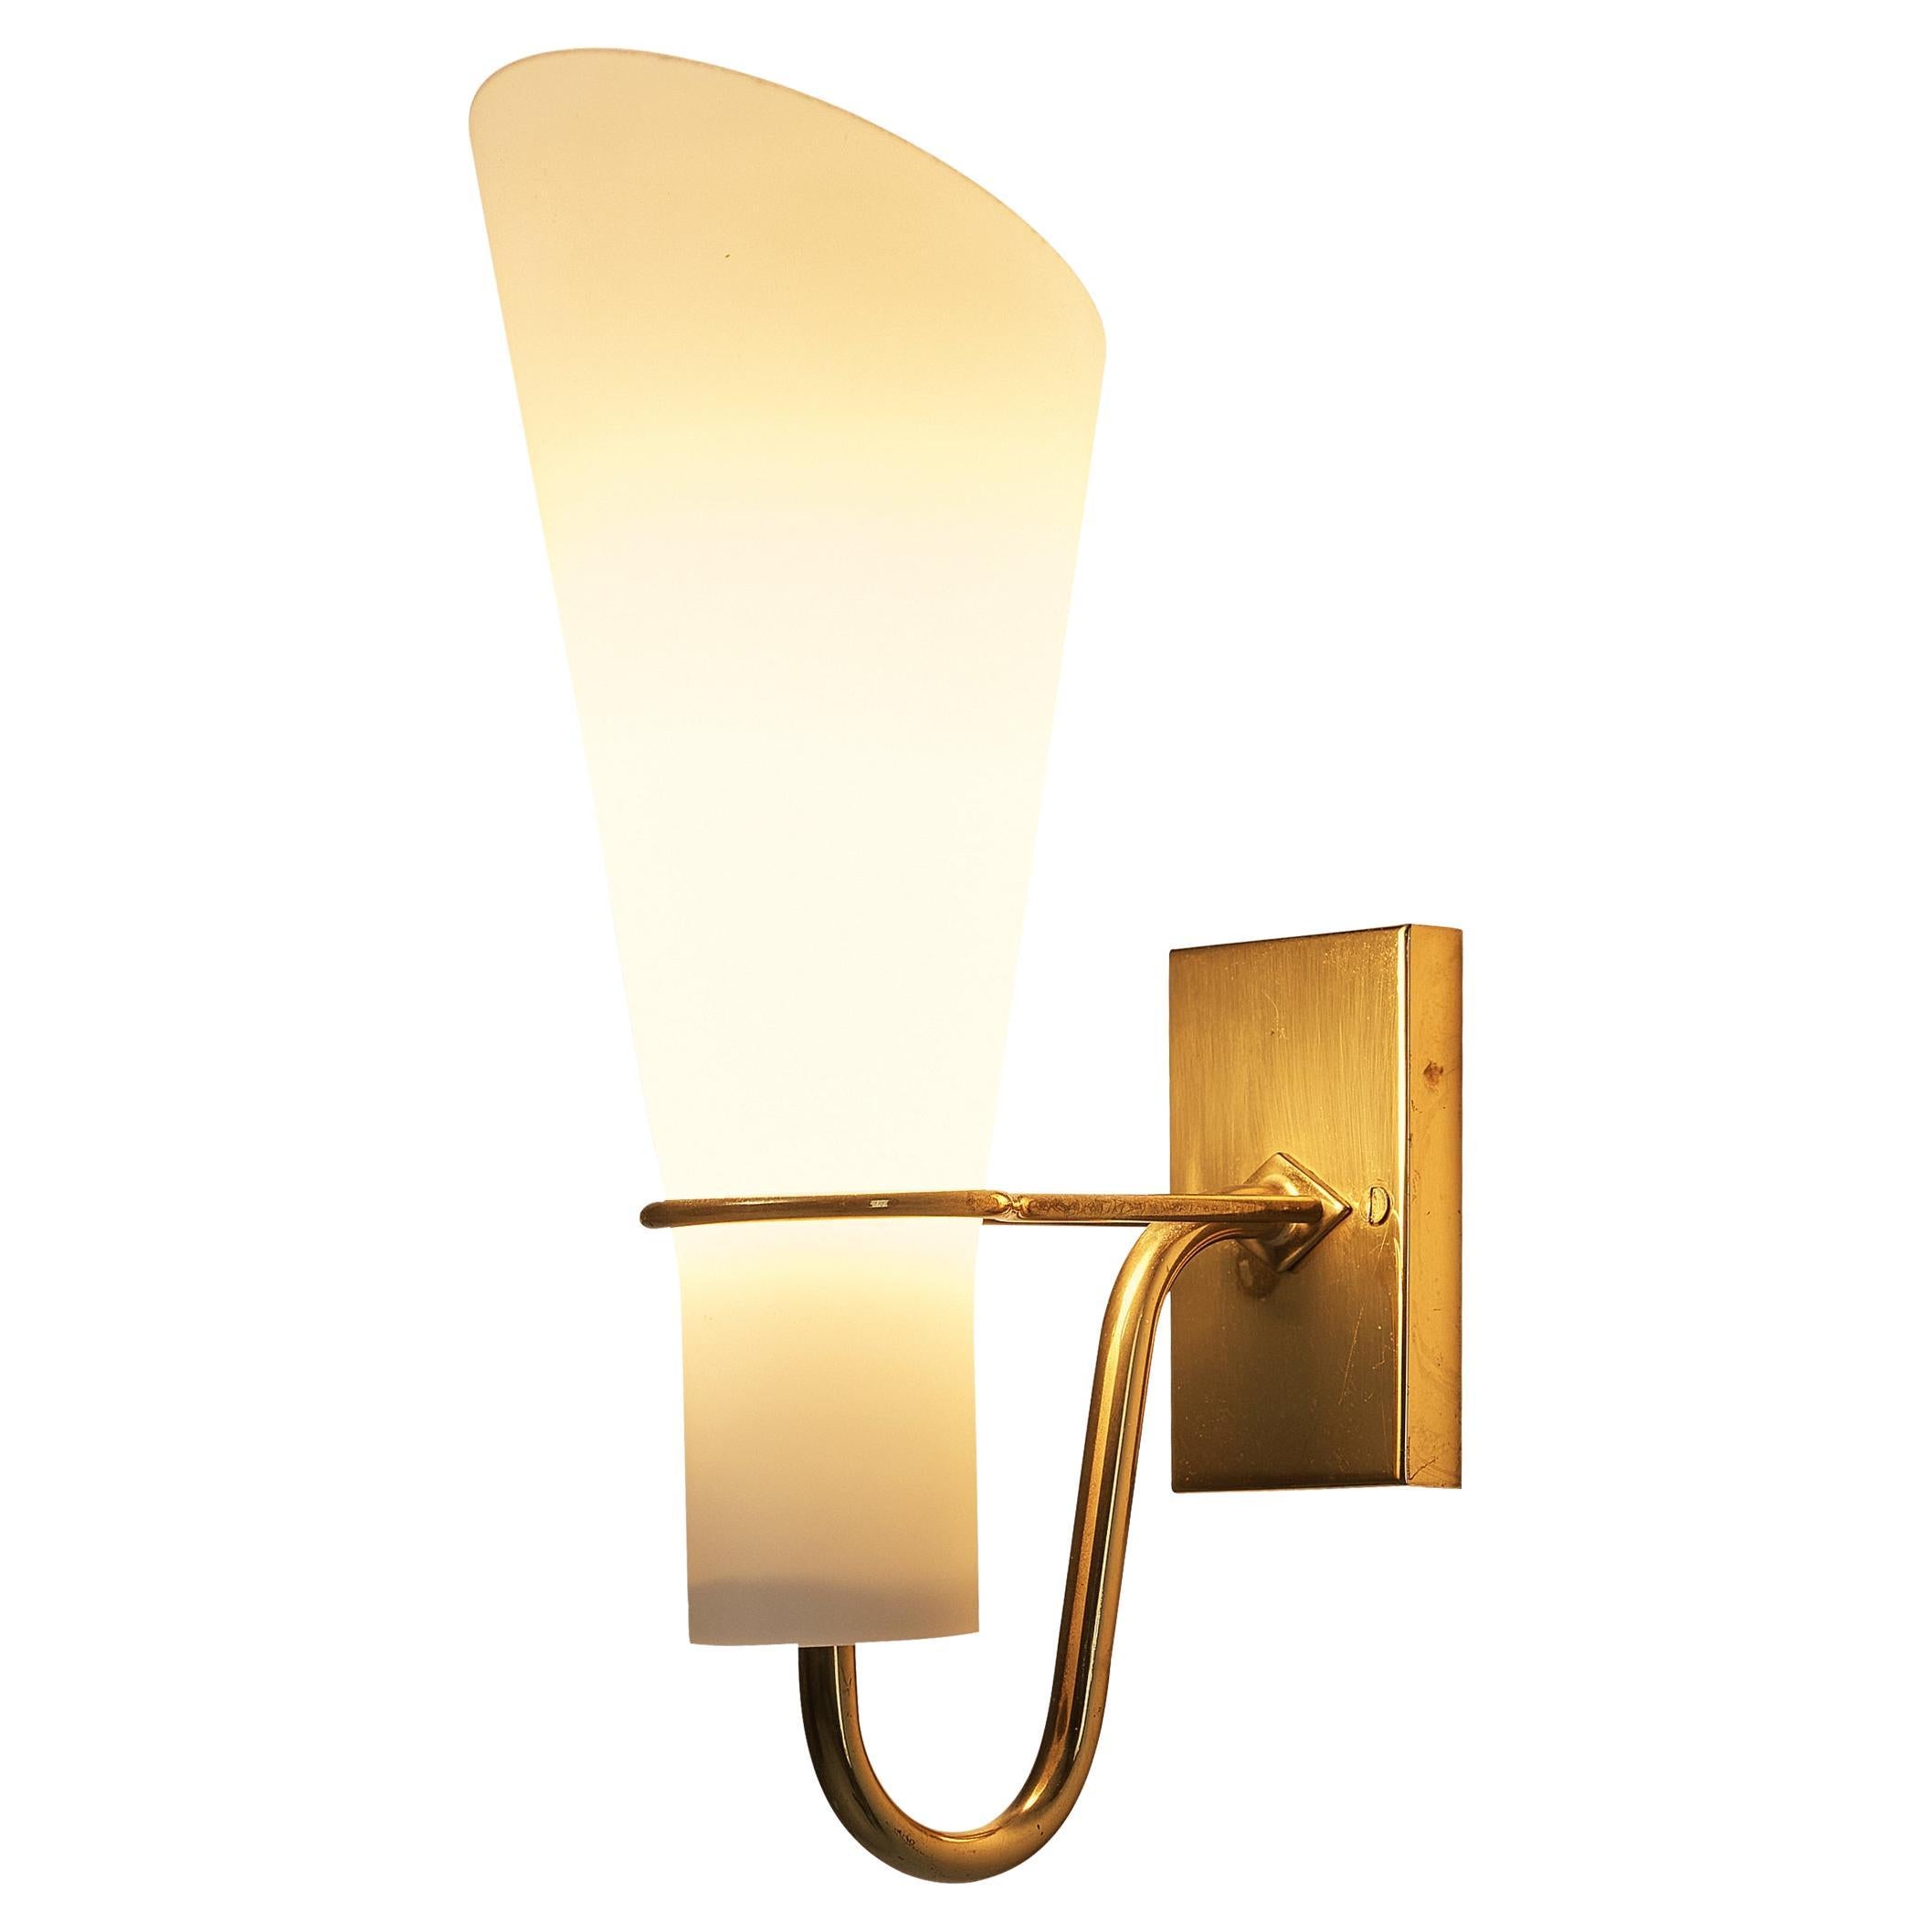 Hans Bergström for ASEA Belysning Wall Light in Brass and White Glass 